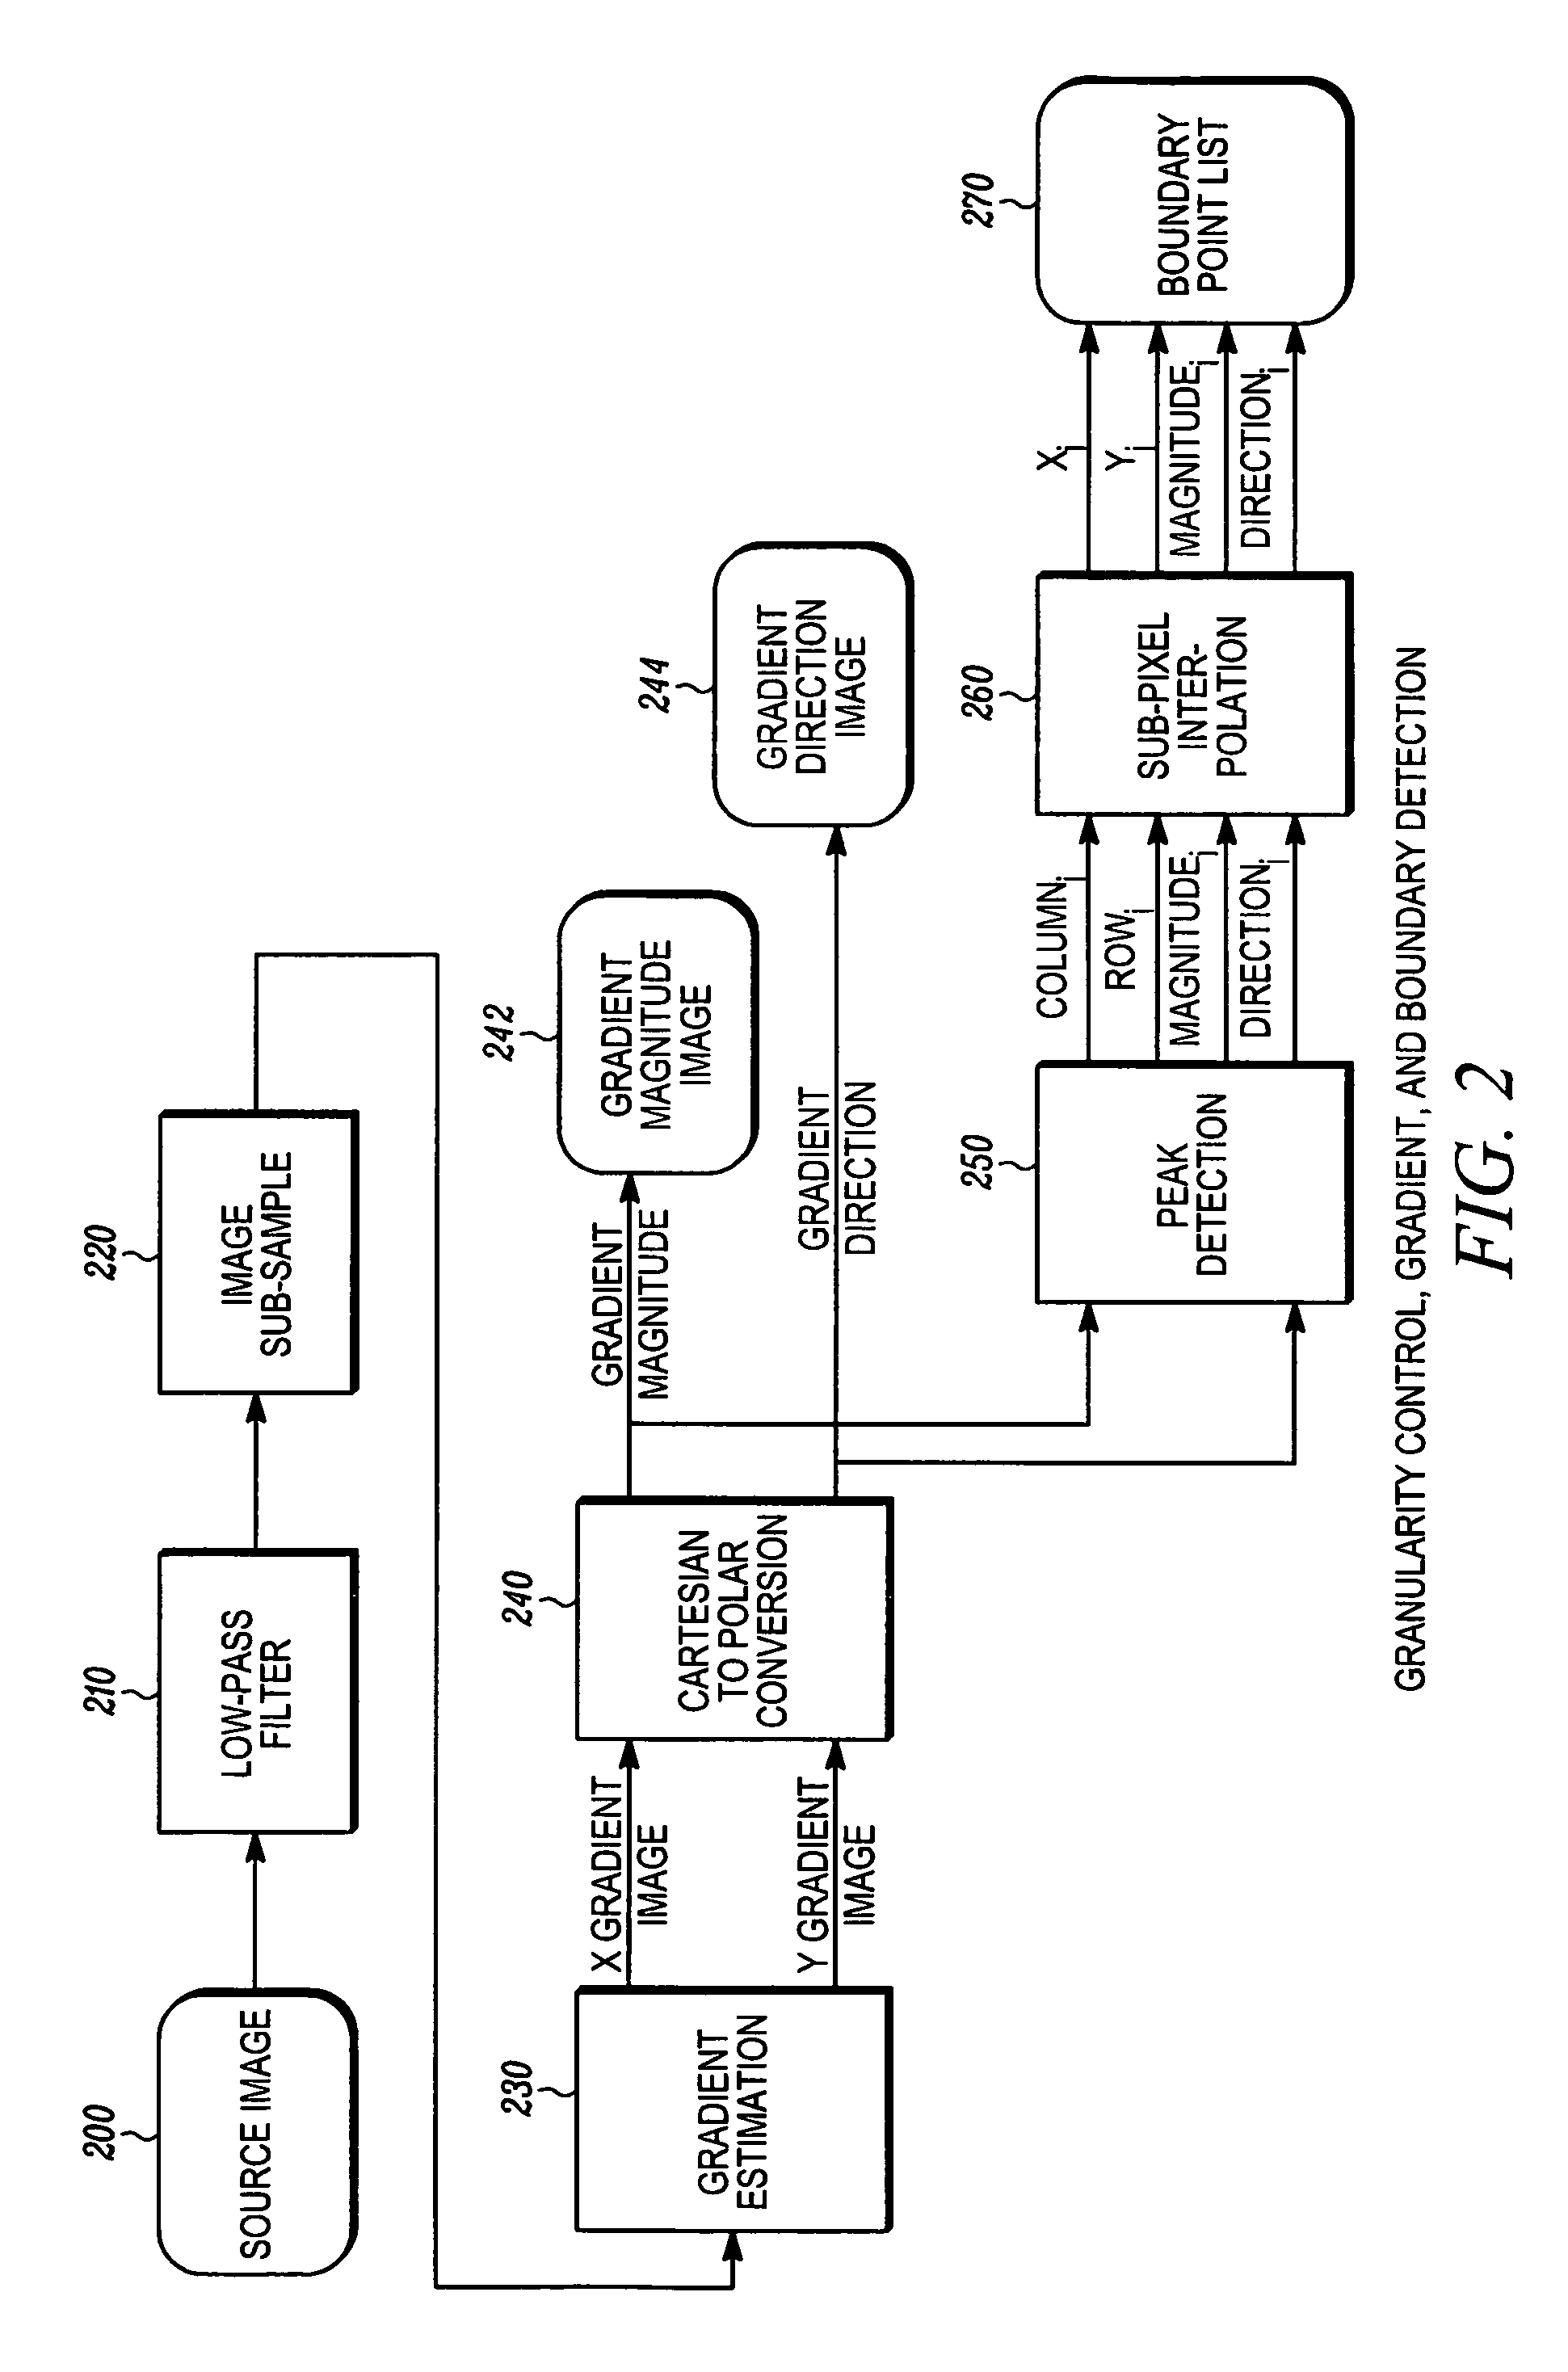 Method for fast, robust, multi-dimensional pattern recognition